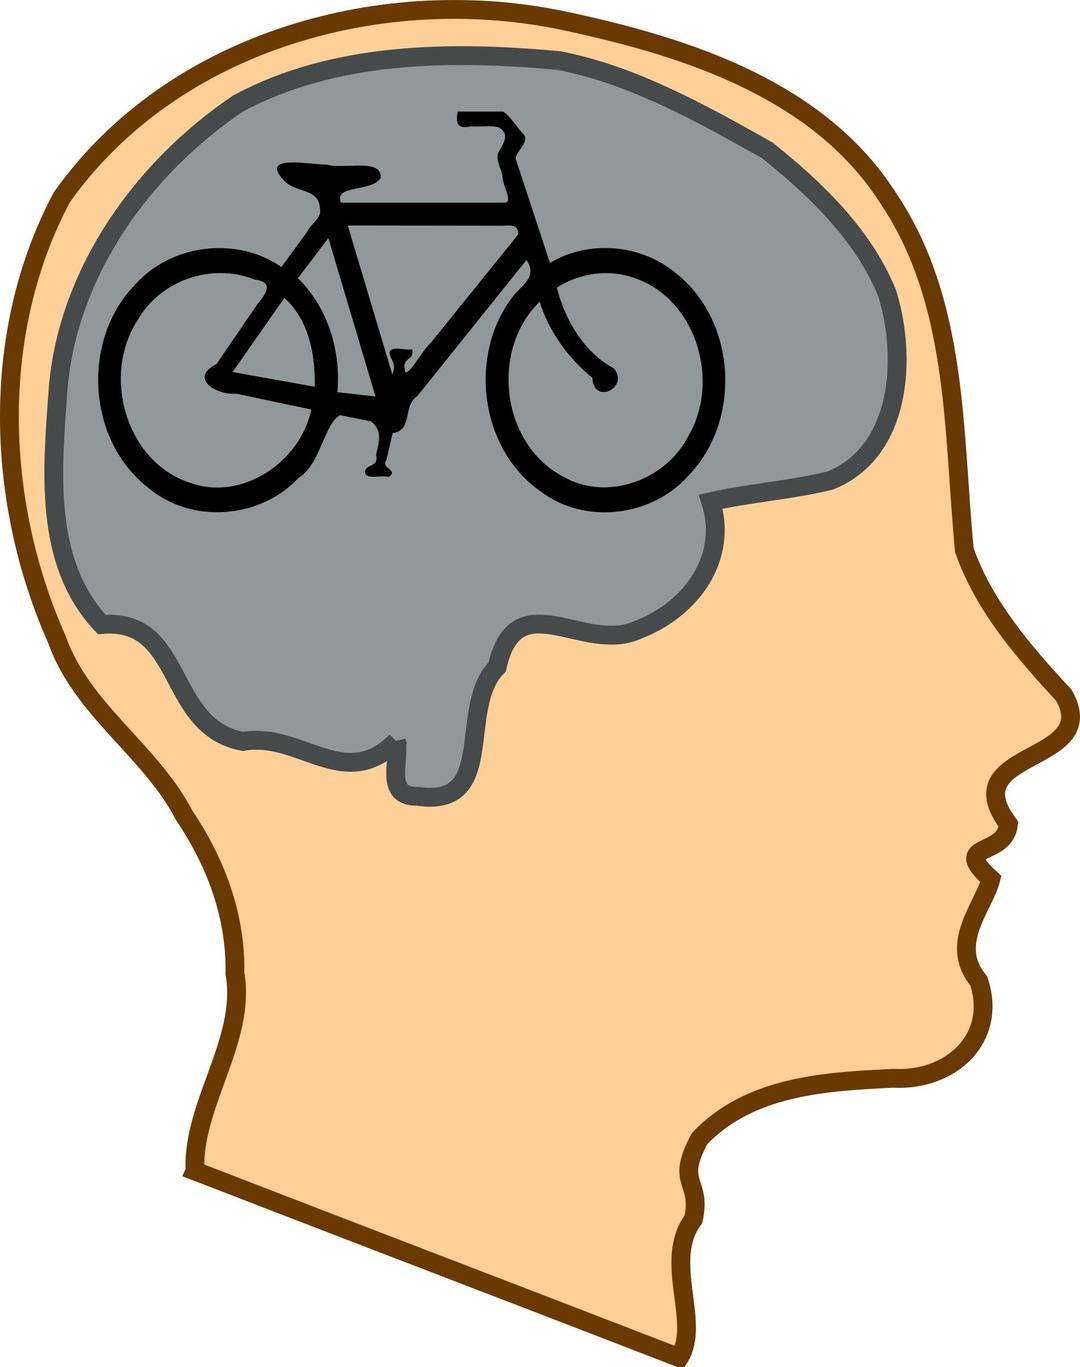 Bicycle For Our Minds png transparent